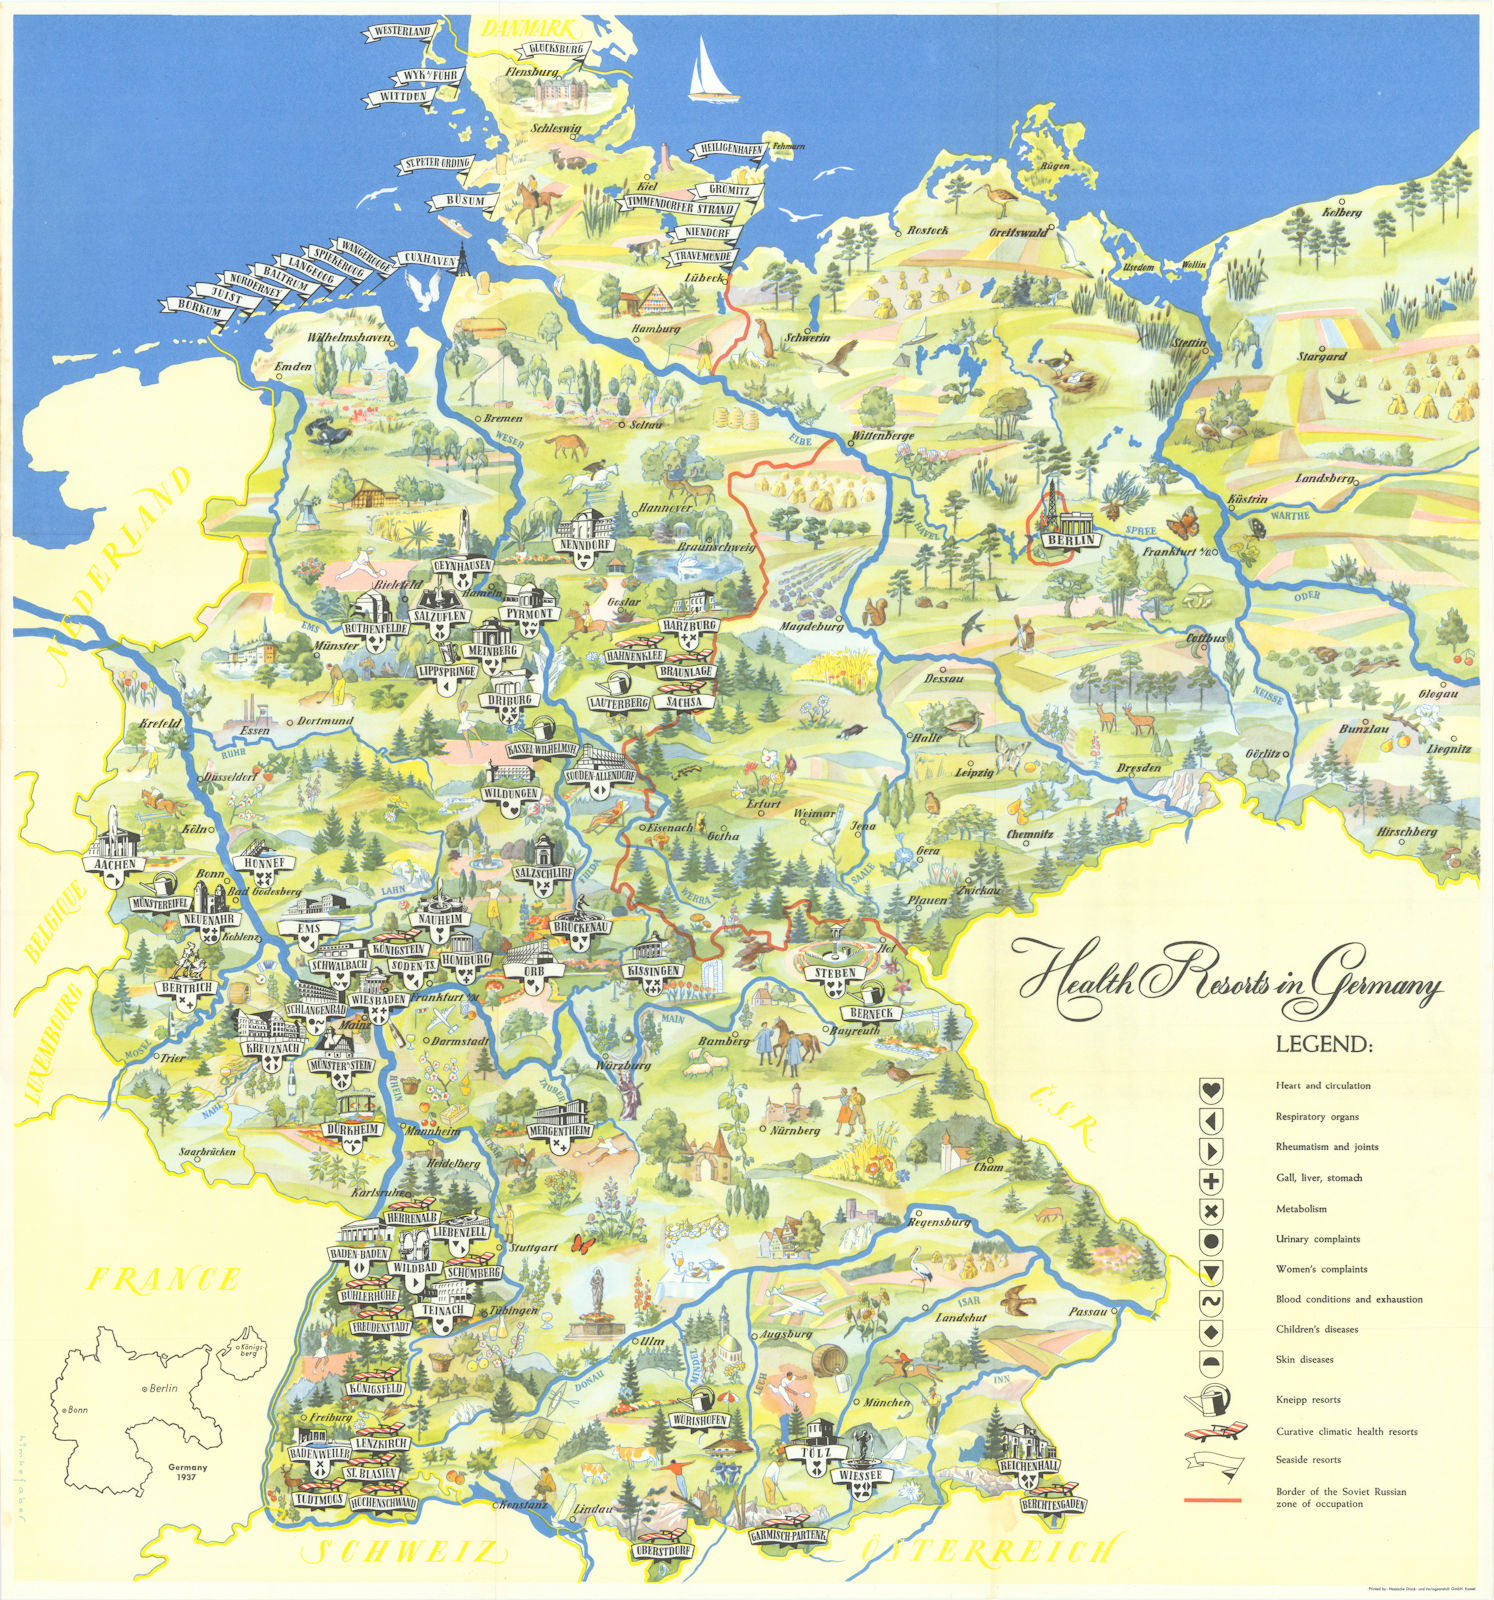 Associate Product Health Resorts in Germany. Pictorial poster map. Himkefaber 1958 old